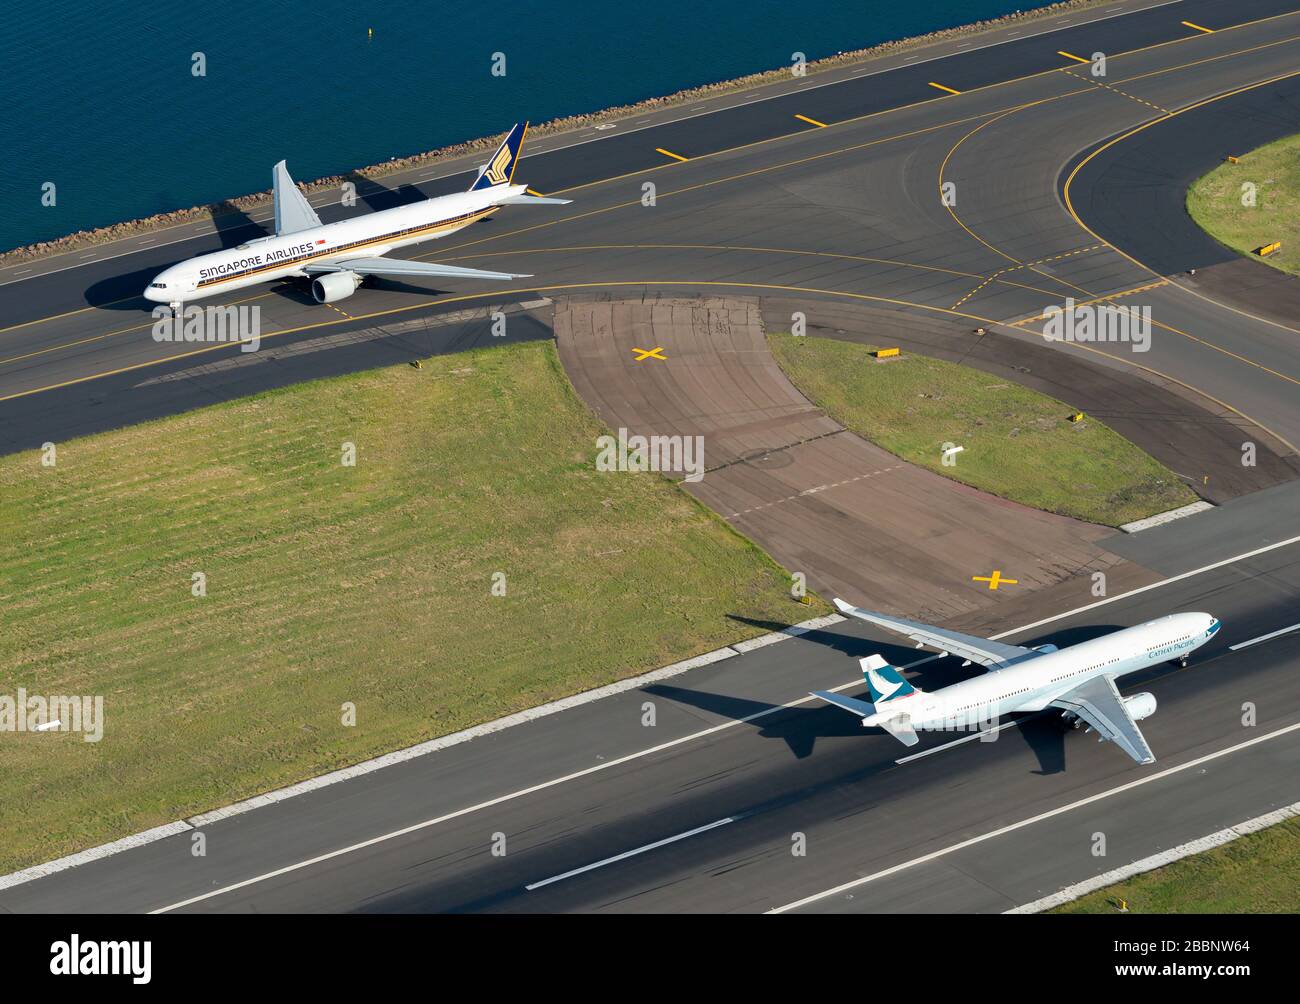 Cathay Pacific Airbus A330 and Singapore Airlines Boeing 777 at Sydney International Airport in Australia. Airport operations in runway and taxiway. Stock Photo